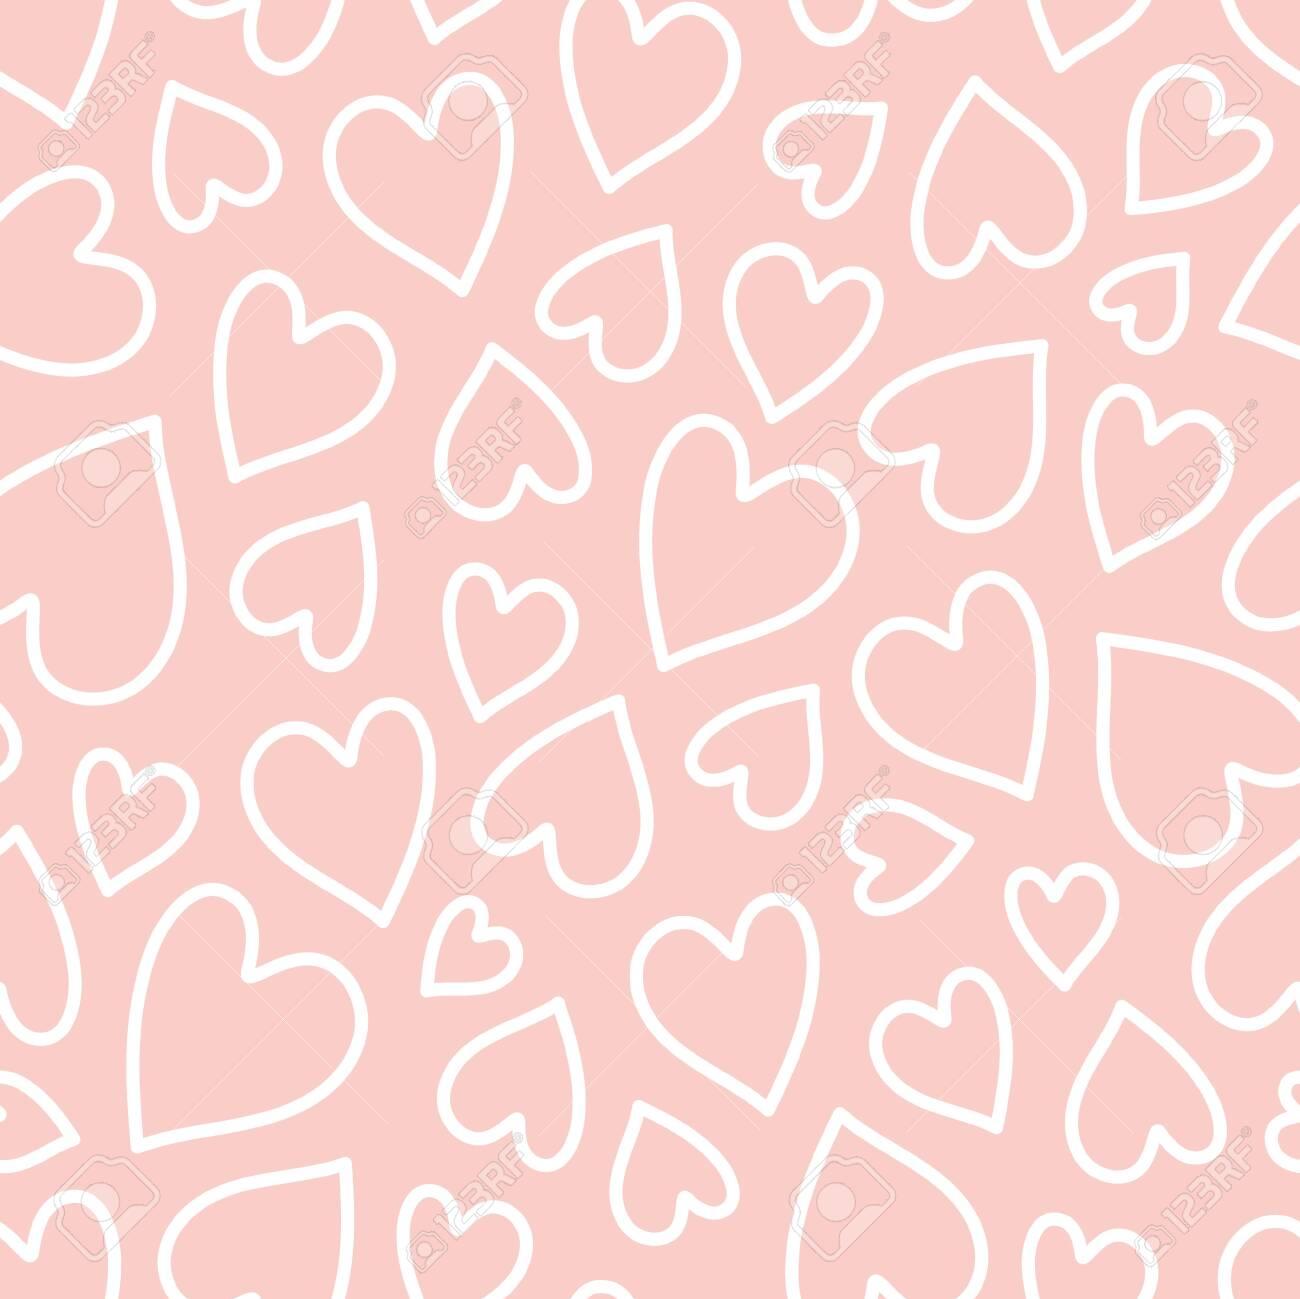 Cute Seamless White Hearts Pattern For Valentine S Day On Pale